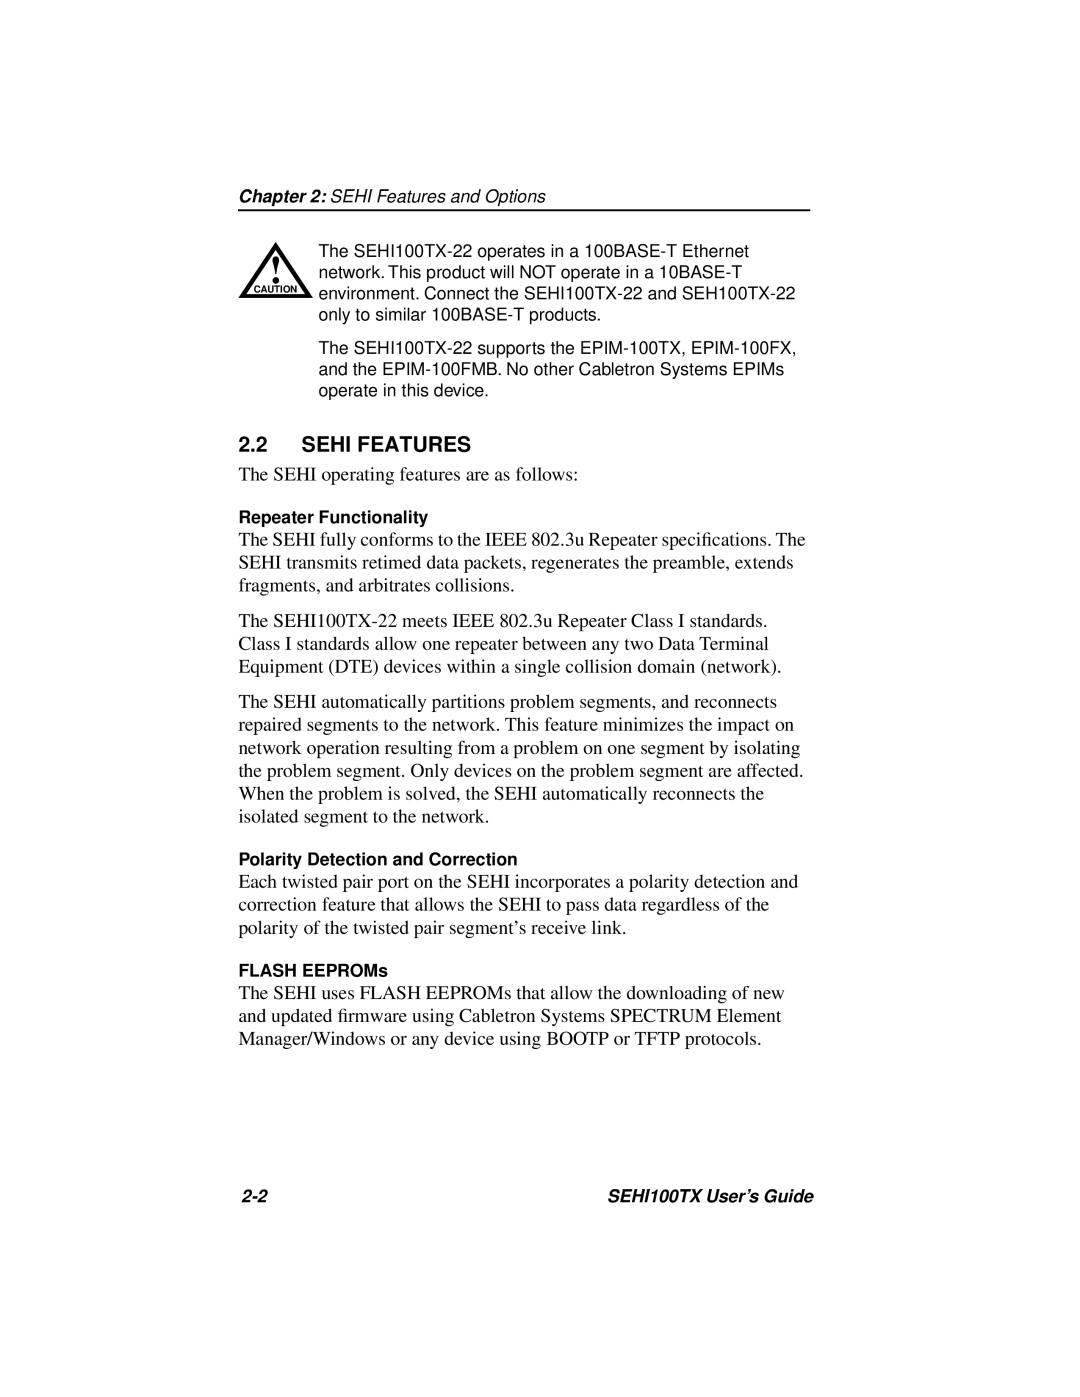 Cabletron Systems SEHI100TX-22 manual Sehi Features 